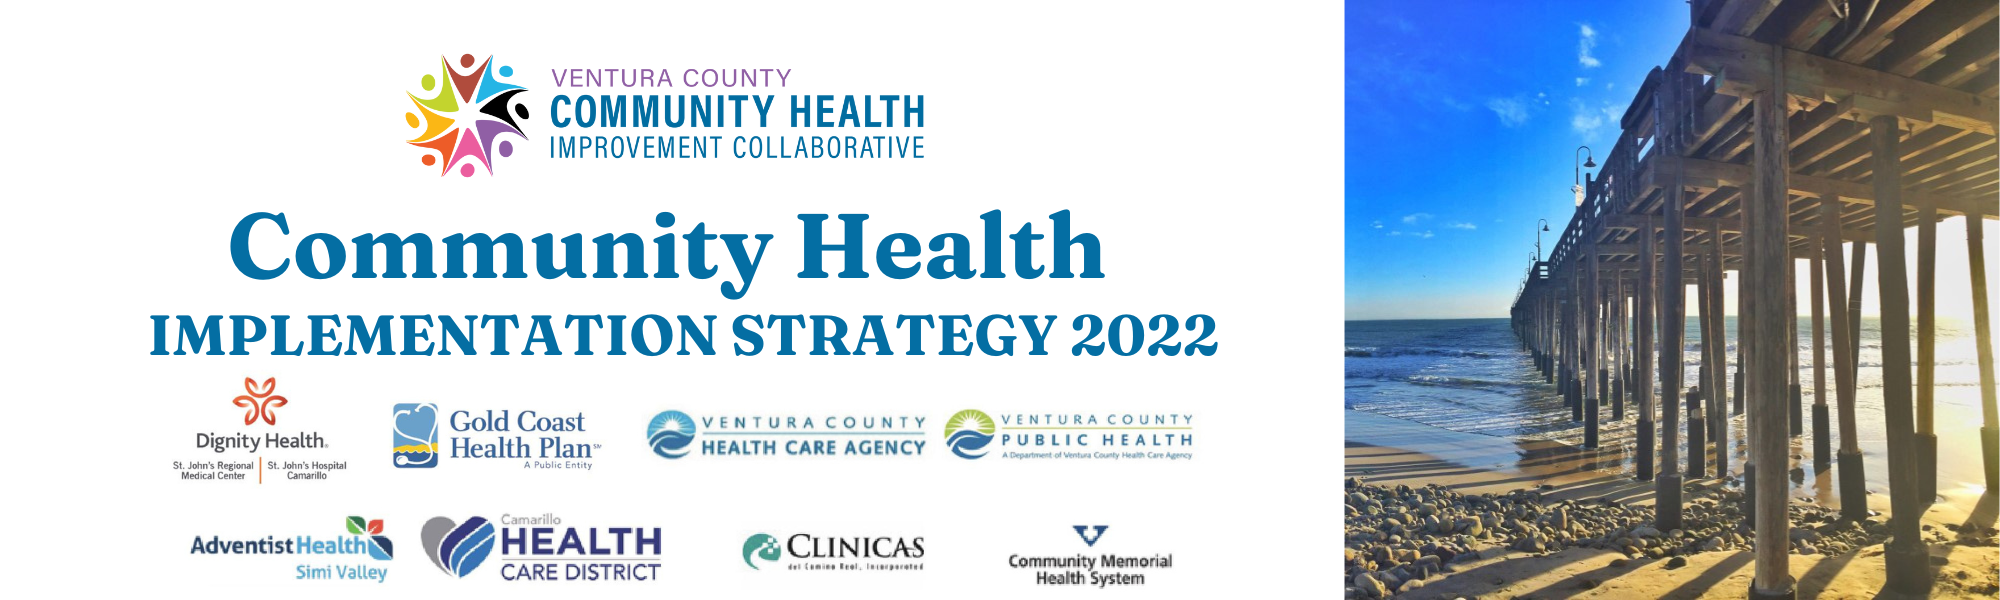 NEW Community Health Implementation Strategy